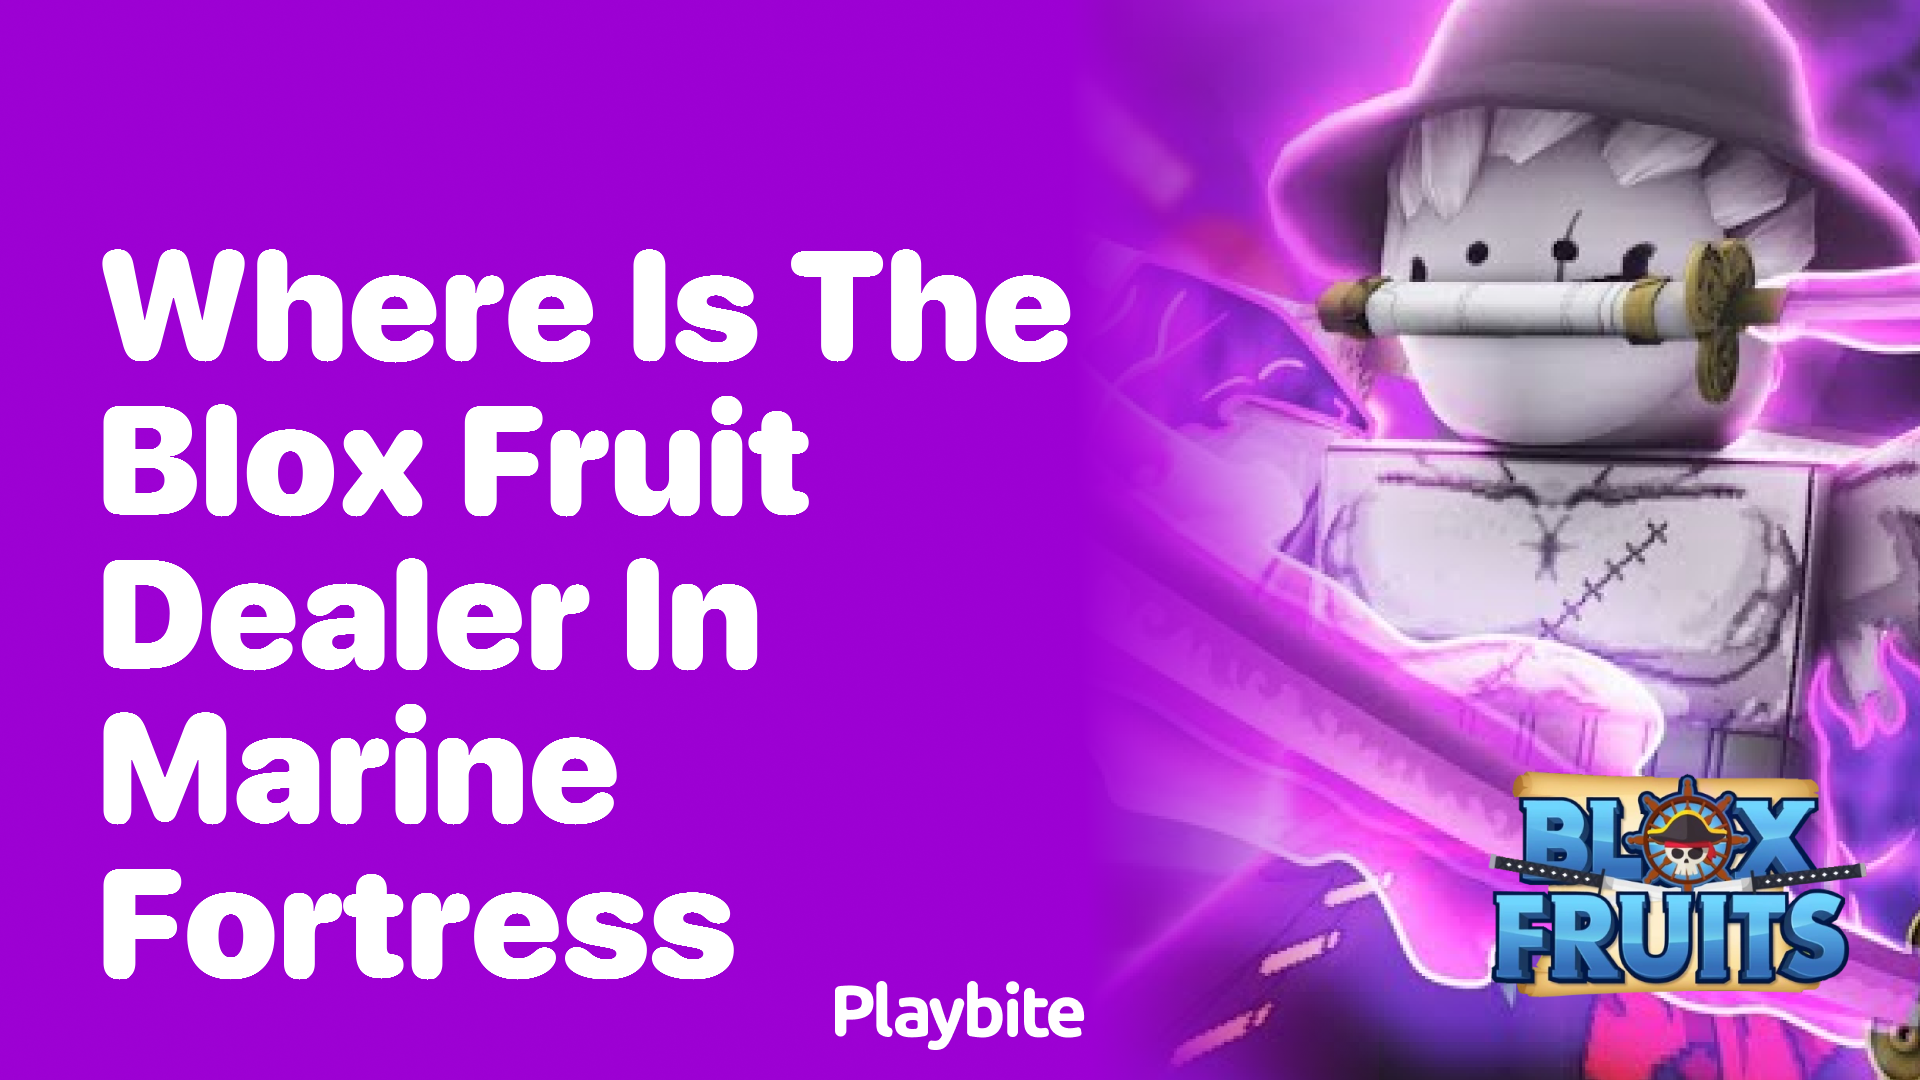 Where Is the Blox Fruit Dealer in Marine Fortress? - Playbite